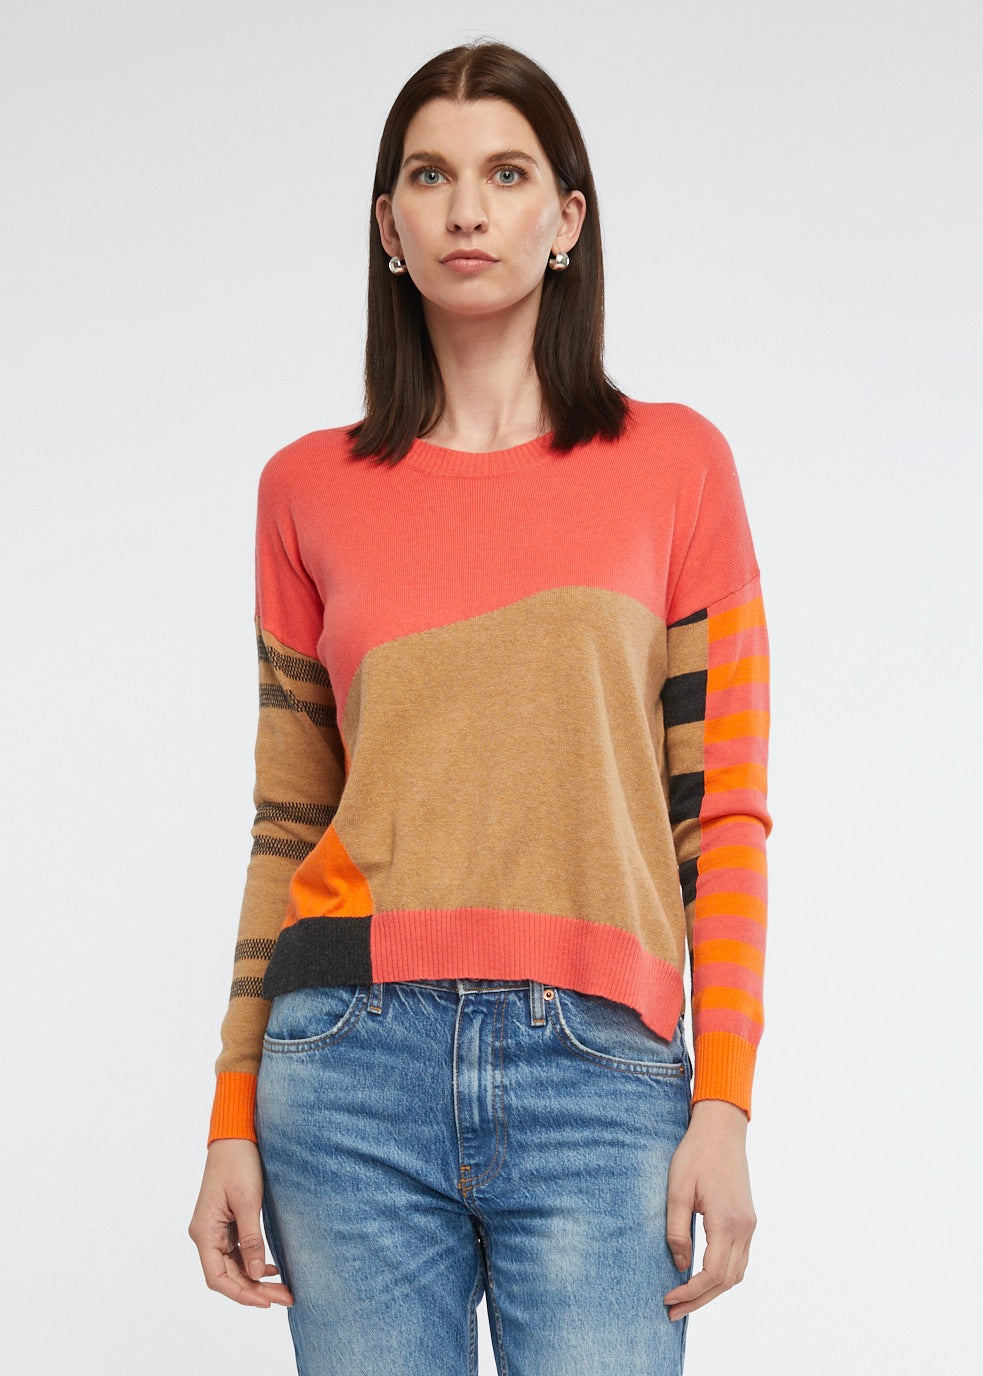 Eclectic Intarsia Jumper in Pink and Orange